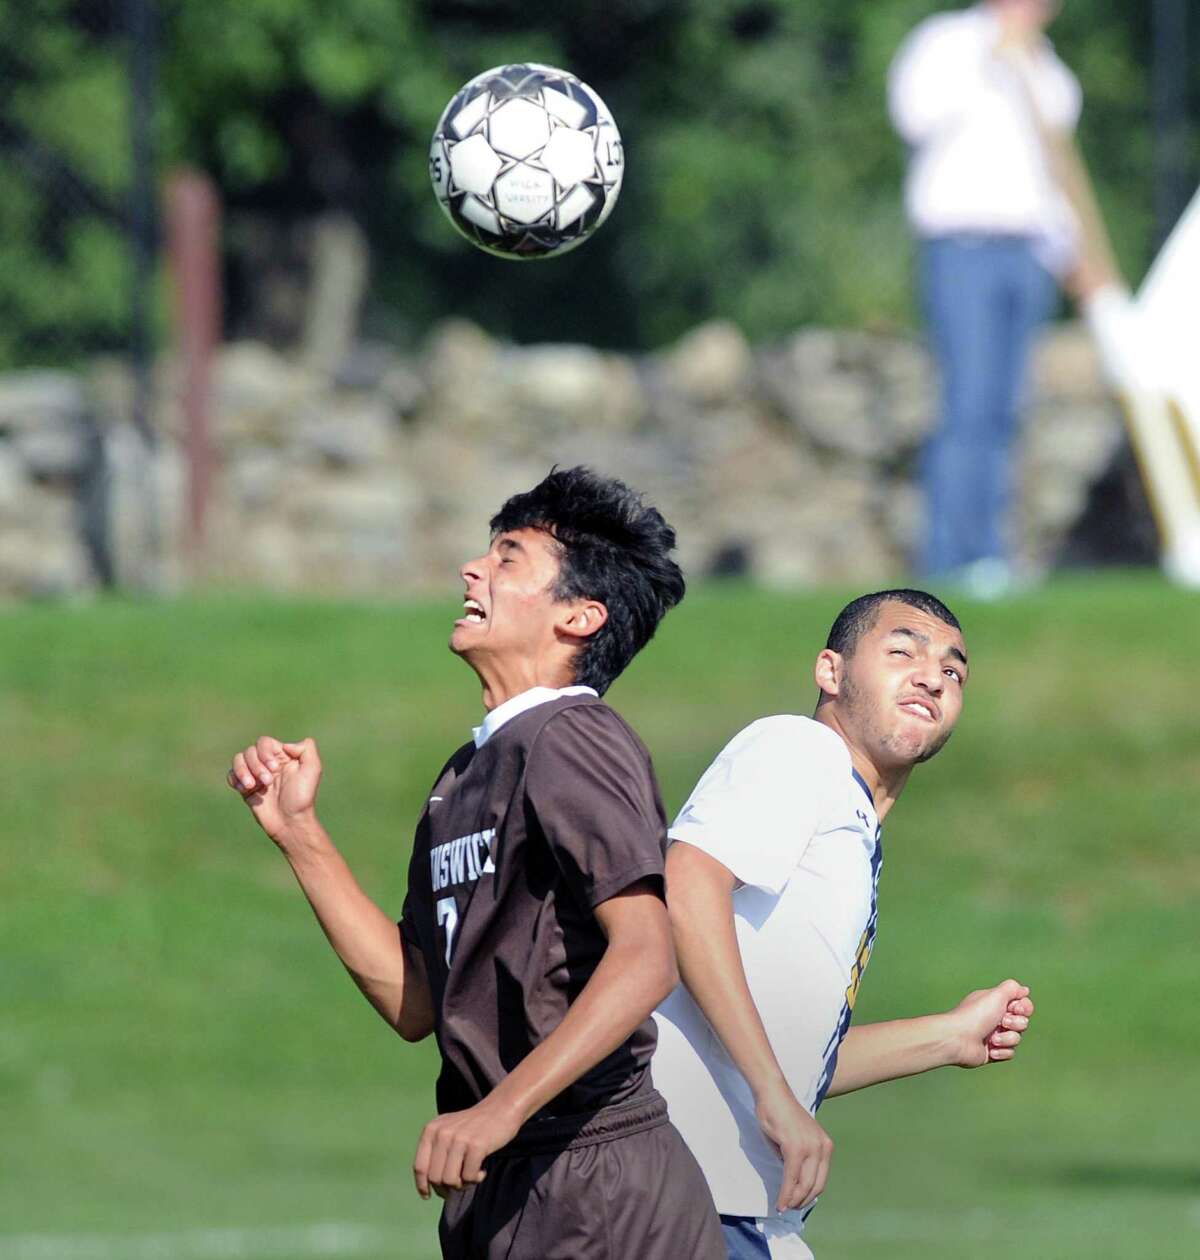 Aaryan Chinai (#7) of Brunswick, left, and a Trinity-Pawling player go to head the ball during the boys high school soccer match between Brunswick School and Trinity-Pawling School at Brunswick in Greenwich, Conn., Wednesday, Oct. 10, 2018.